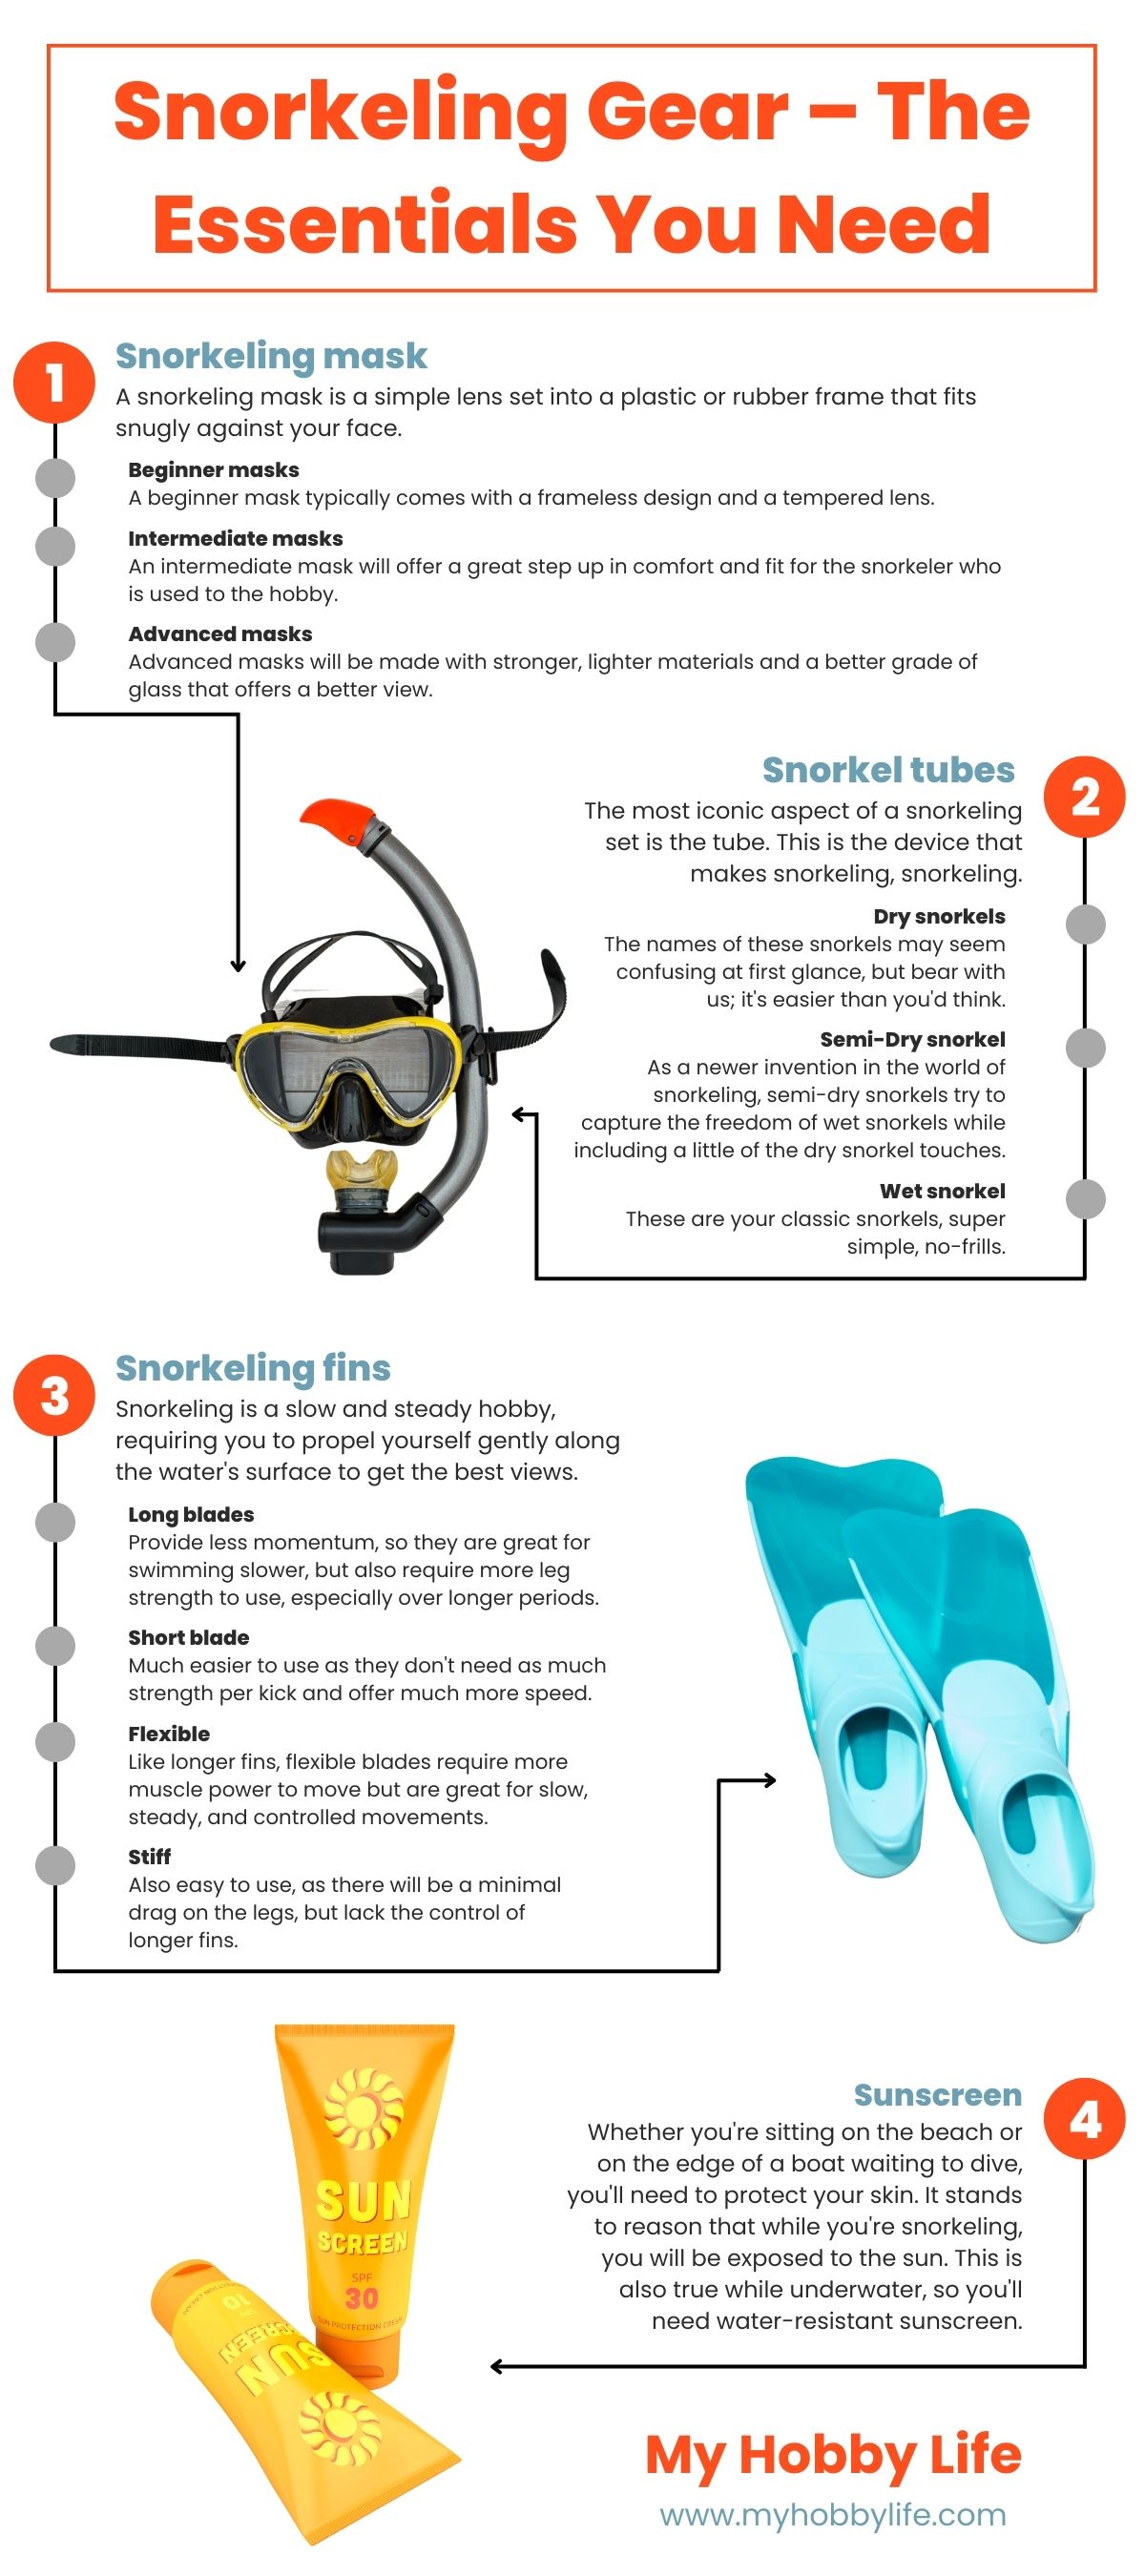 Essential snorkeling gear that every family needs 